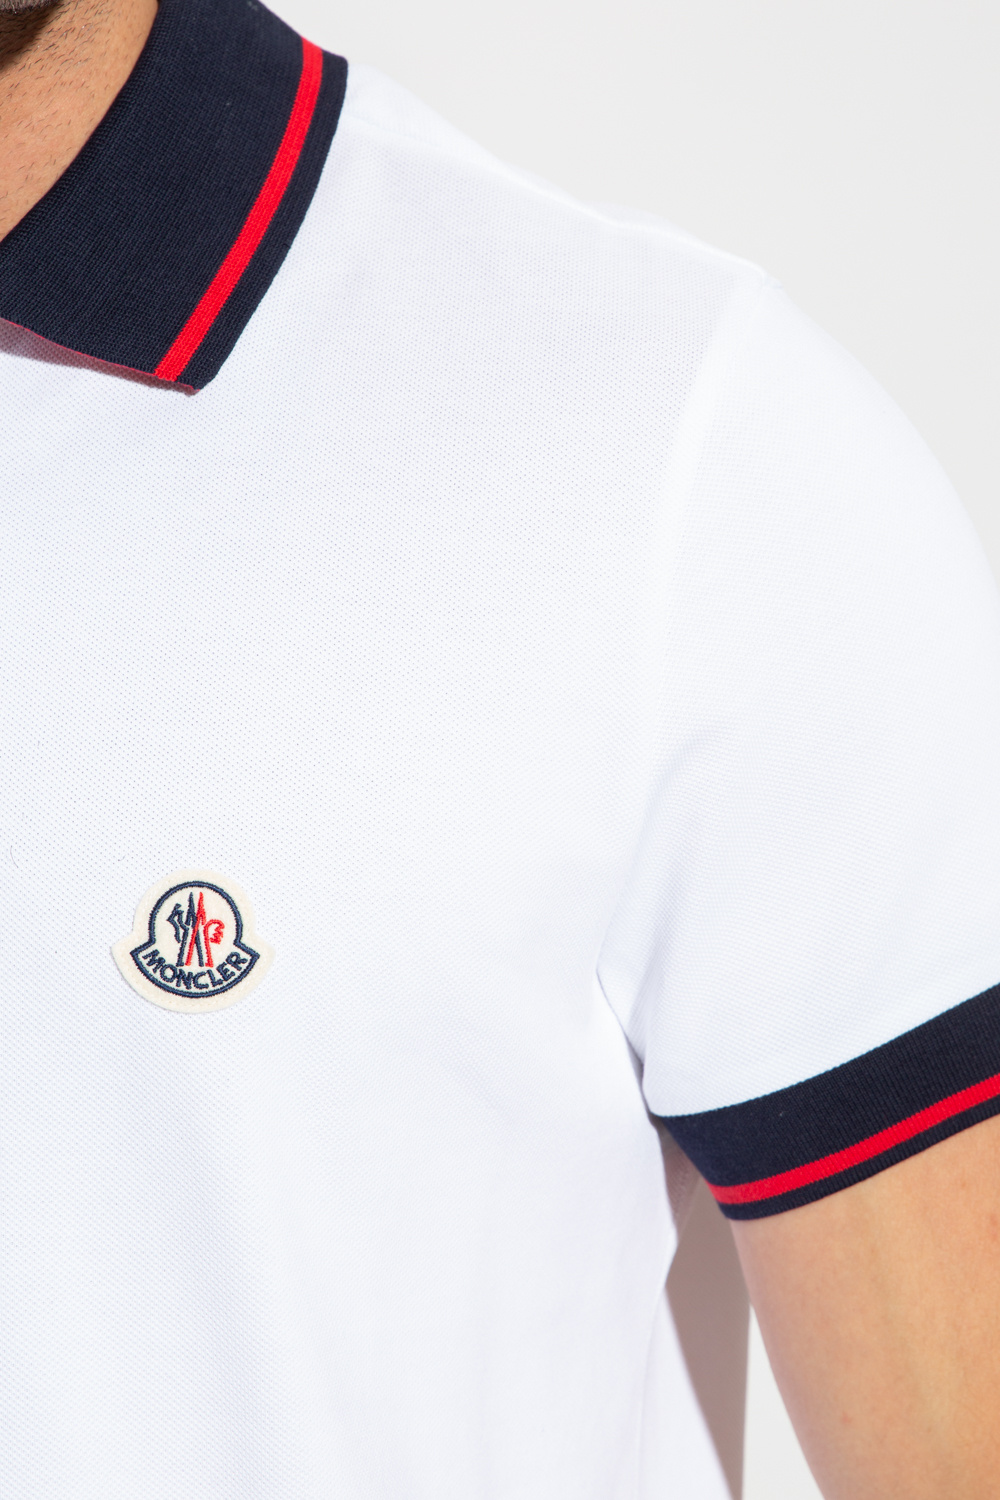 Moncler polo Nico shirt with short sleeves